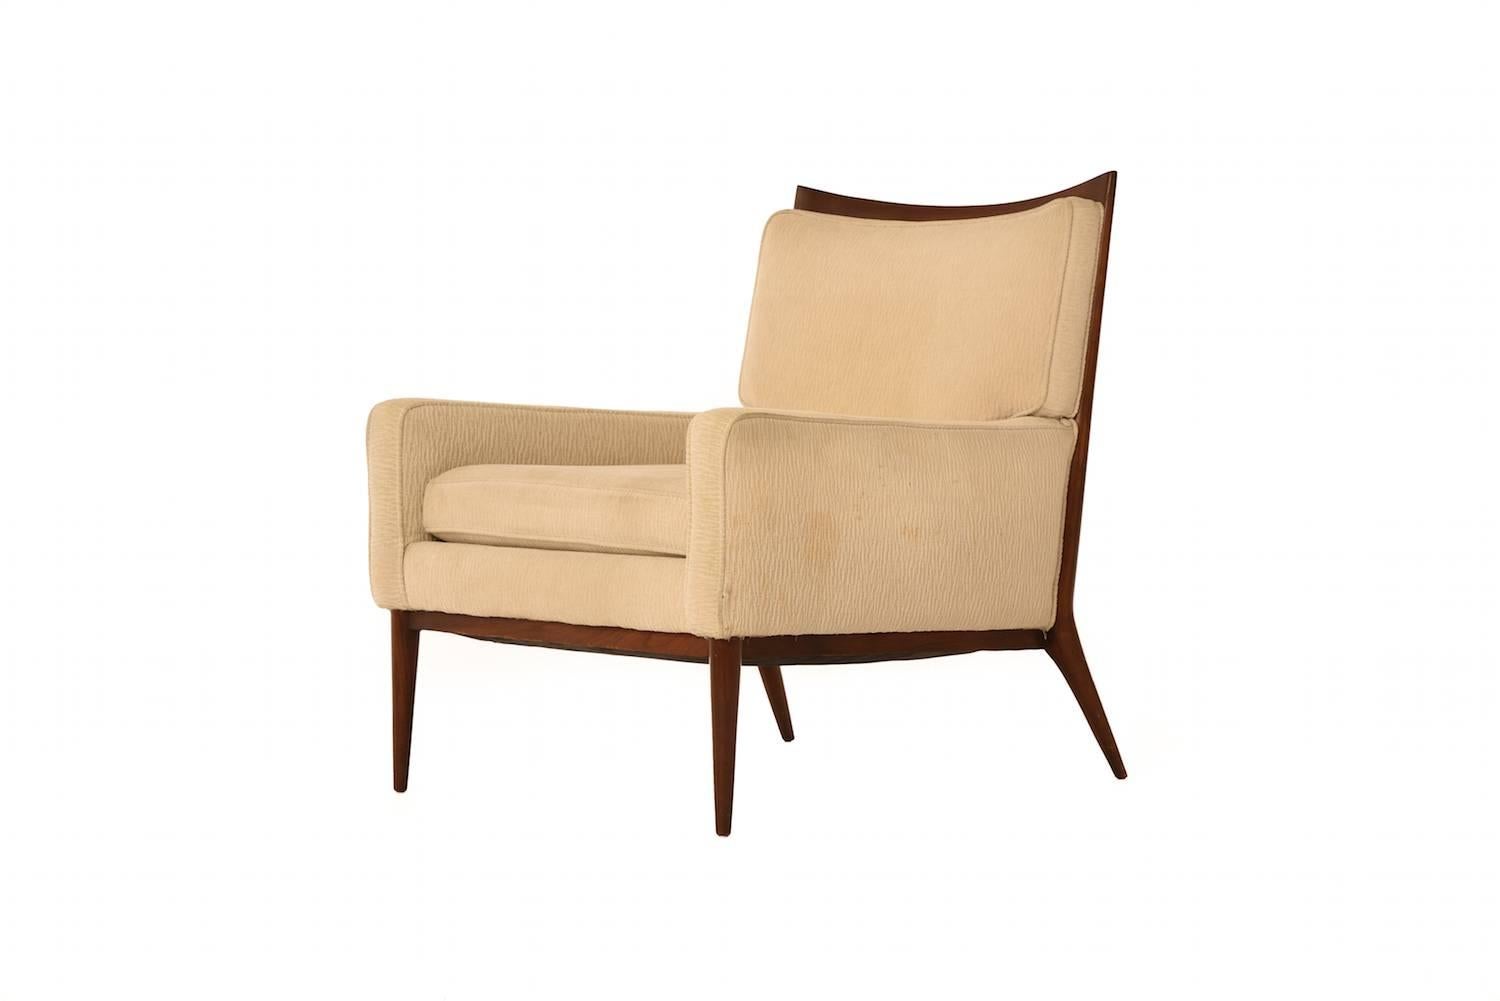 American Mid-Century Modern Armchair, Paul McCobb In Good Condition For Sale In Minneapolis, MN